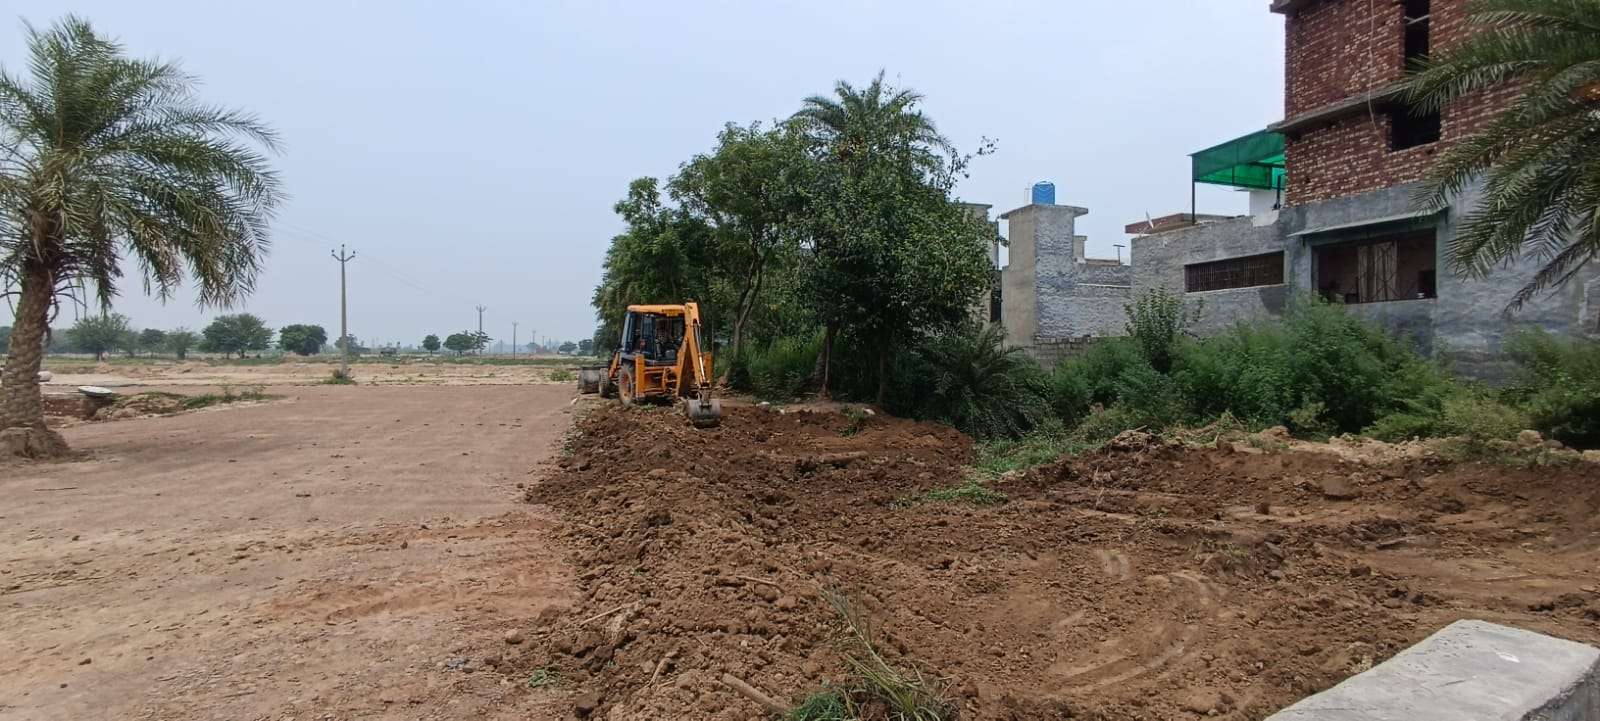 Residential Plots on Chandigarh-Ludhiana Highway within a gated township.